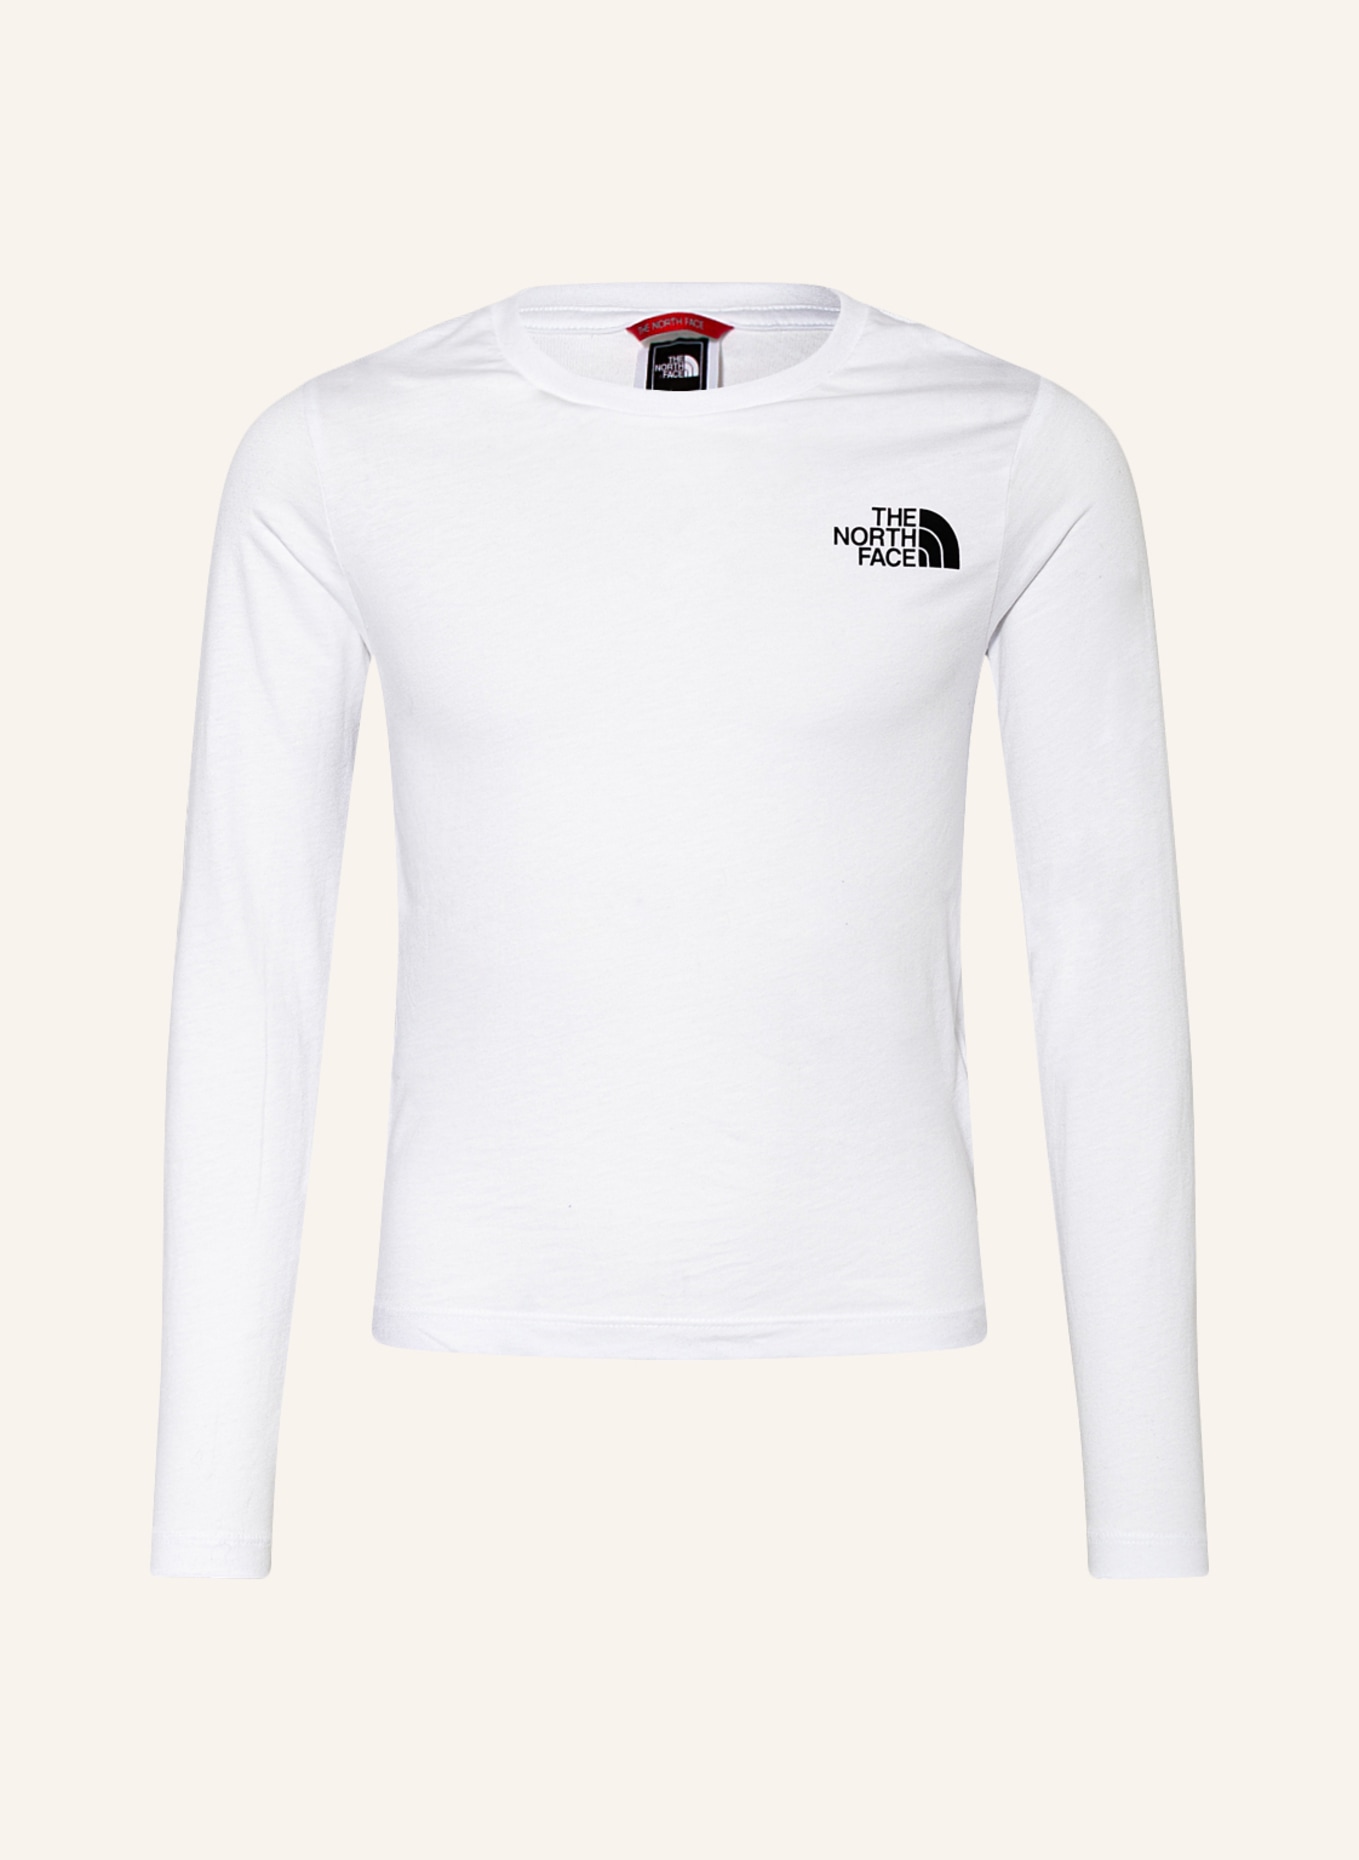 THE NORTH FACE Longsleeve , Farbe: WEISS (Bild 1)